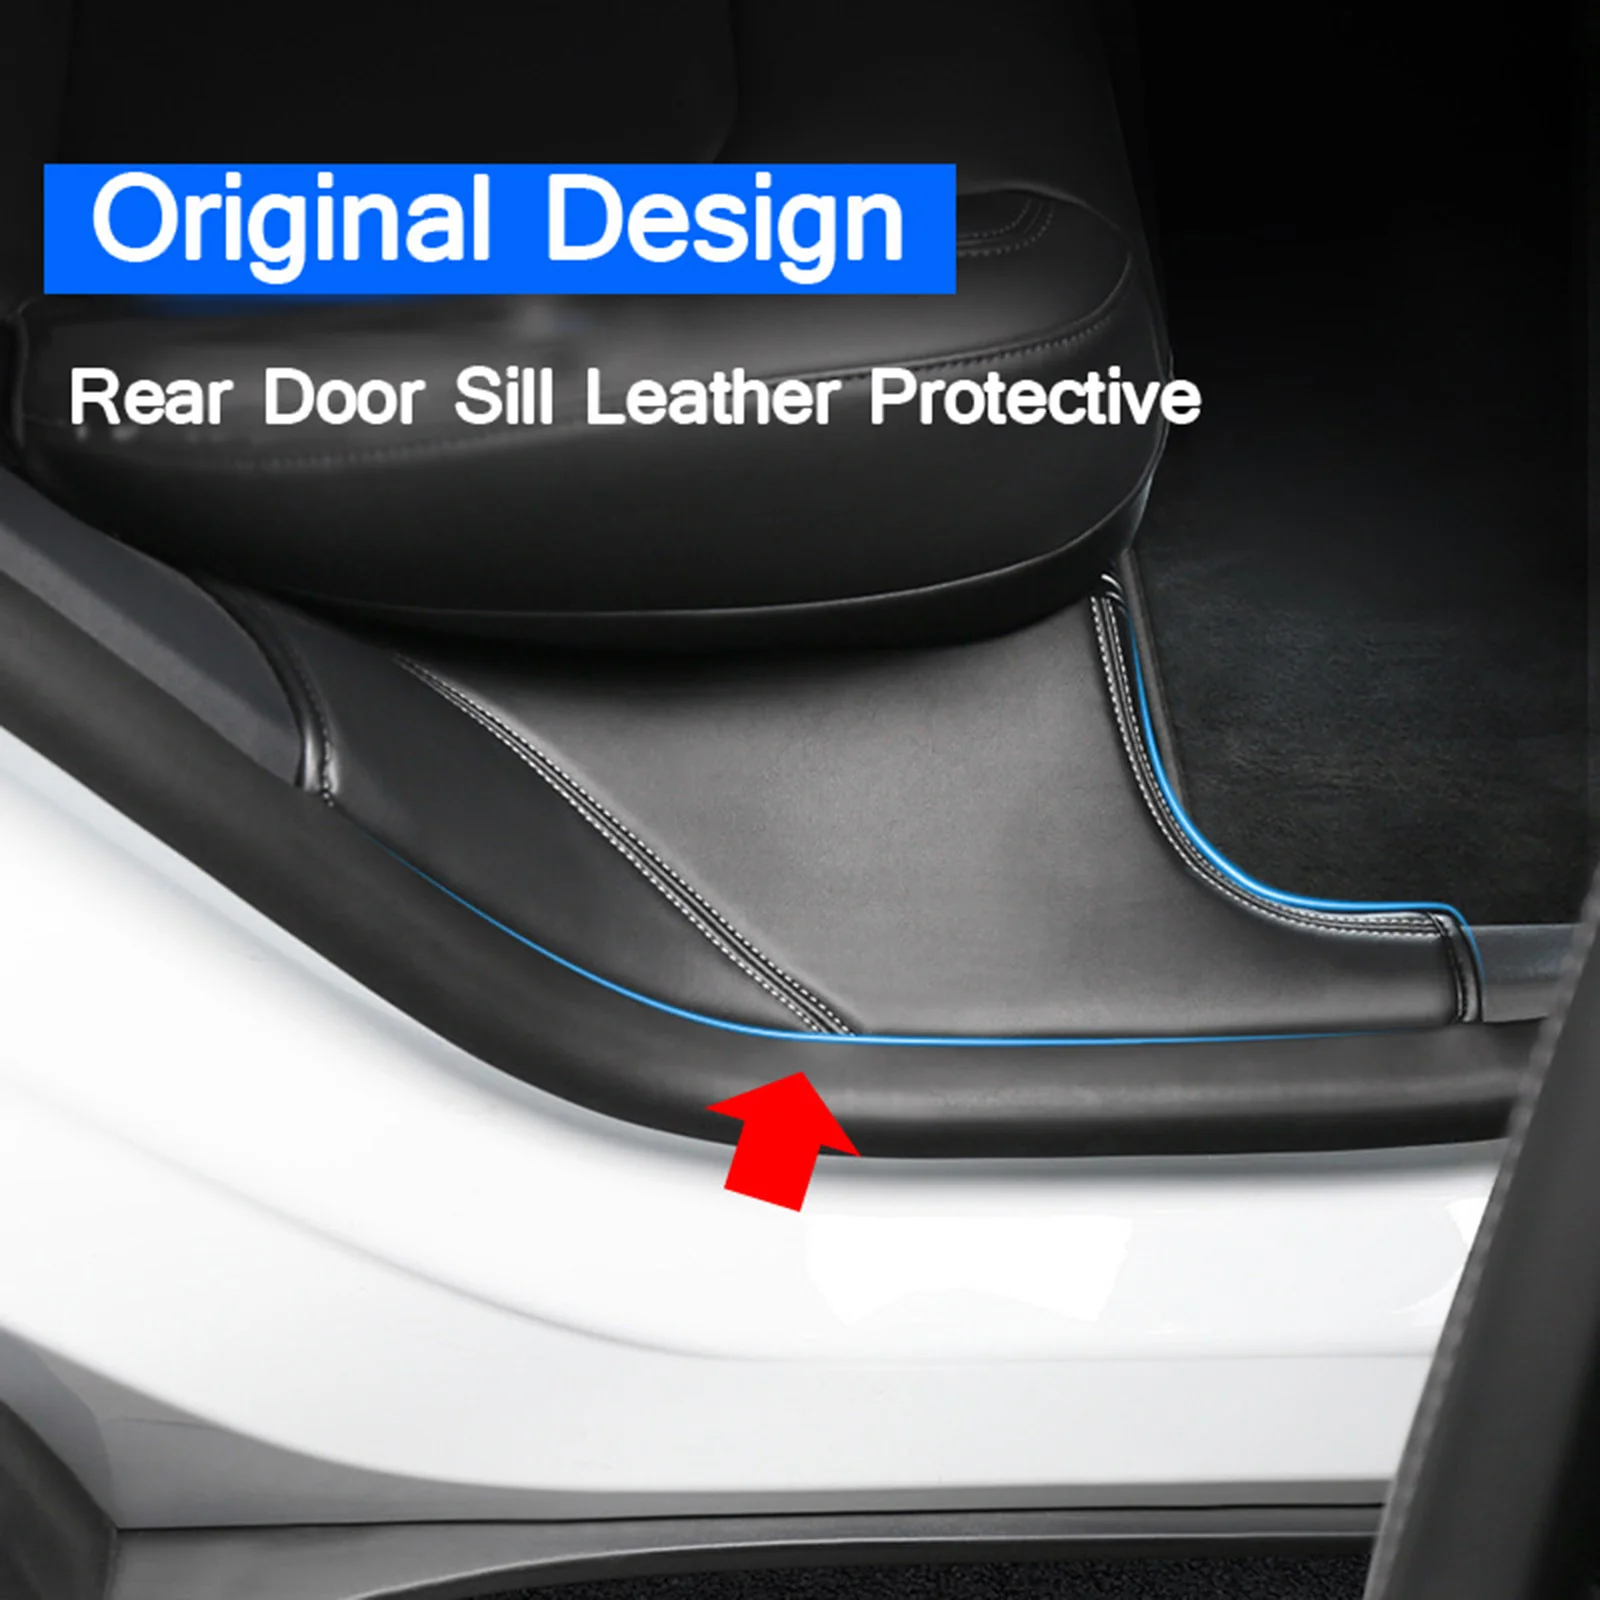 2x Car Rear Door Sill Protector Cover Trim for , PU Leather